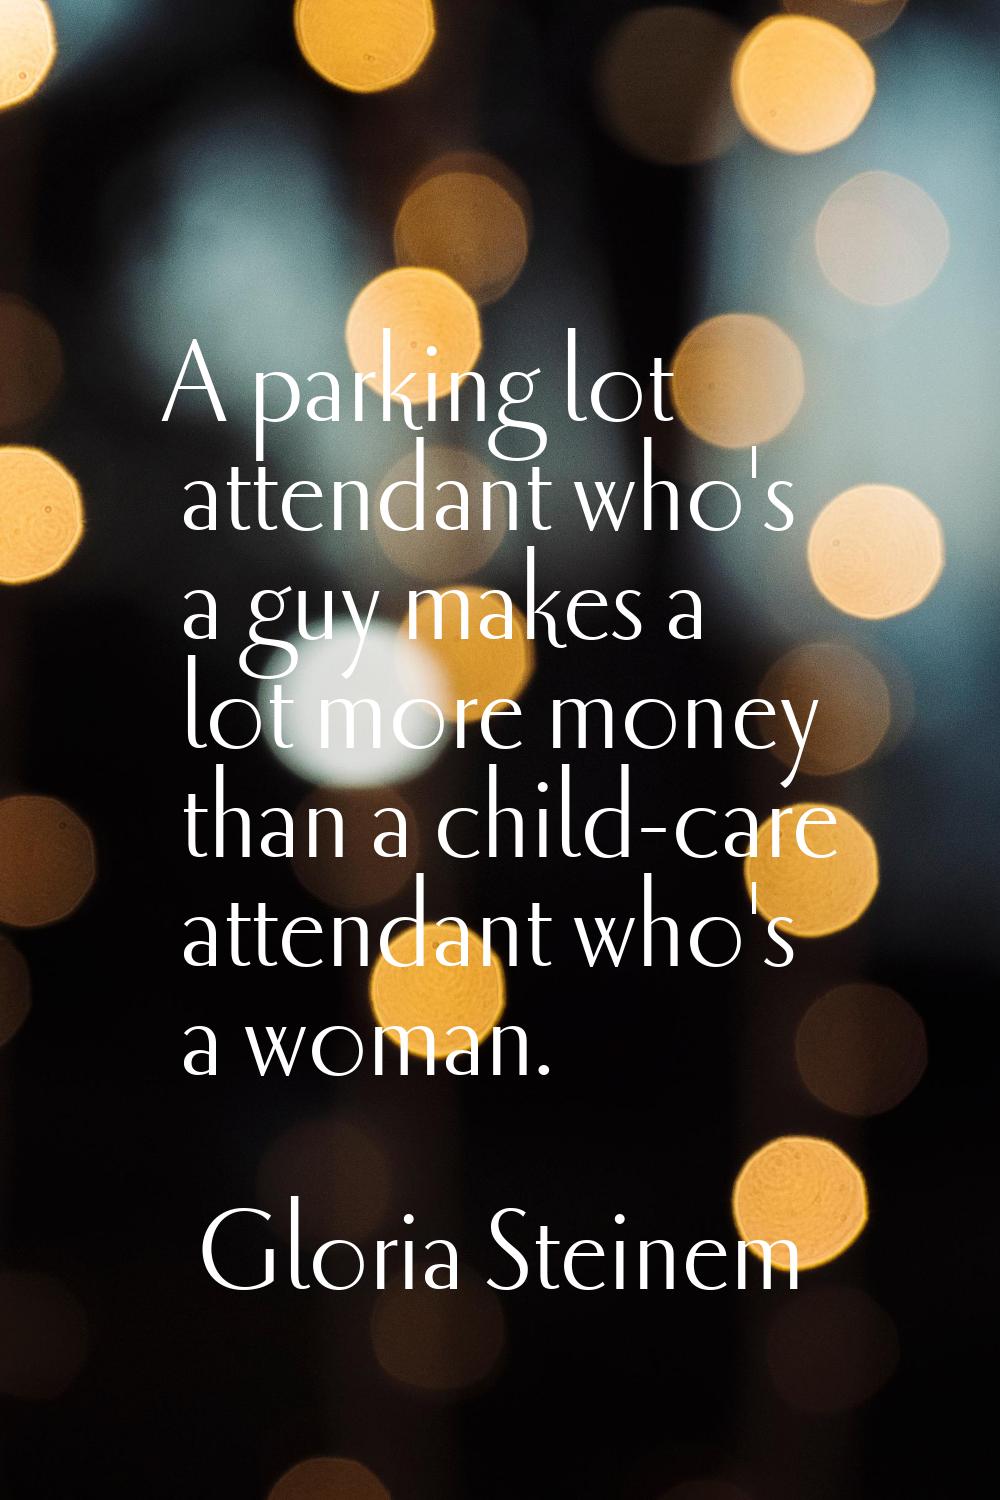 A parking lot attendant who's a guy makes a lot more money than a child-care attendant who's a woma